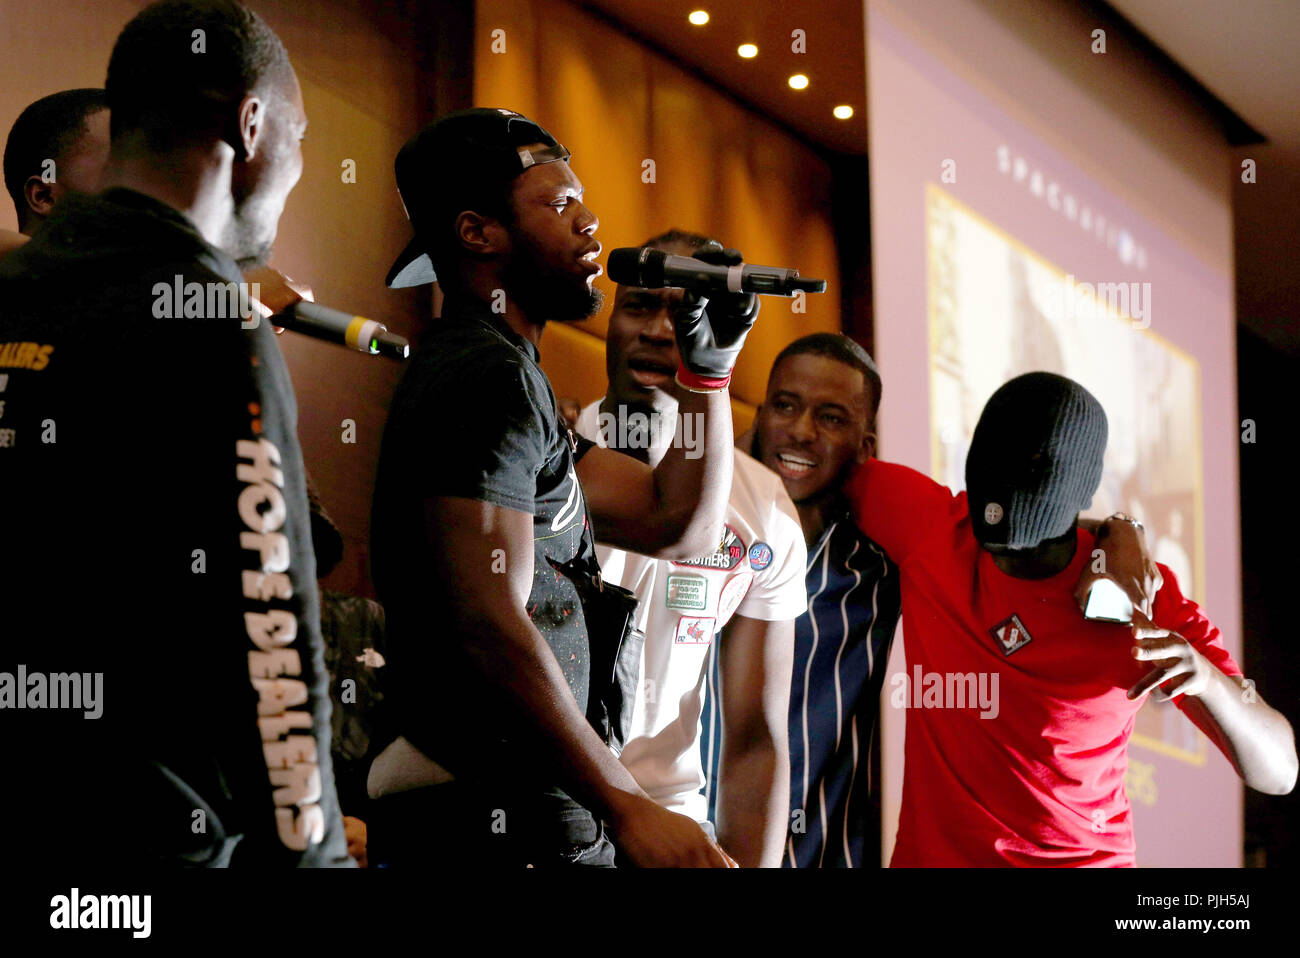 Drill rappers turned gospel artists 'Hope Dealers' perform on stage at a SPAC Nation event held at the Riverbank Park Plaza, London. Stock Photo